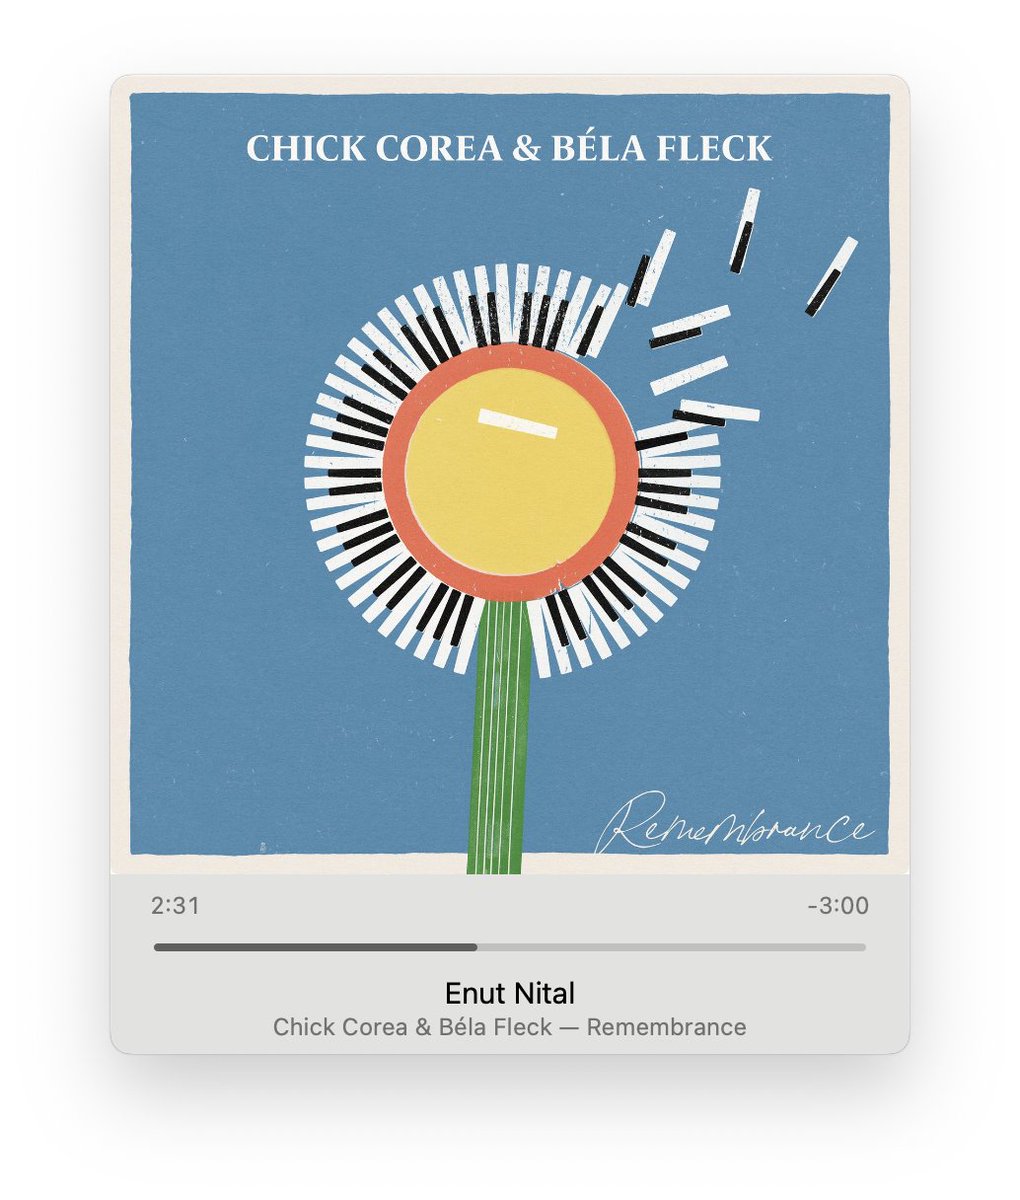 Wonderful. 
A beautiful friendship captured three times over.

Bless you @belafleckbanjo .
Here's to the memory of @ChickCorea !

songwhip.com/chick-corea/re…